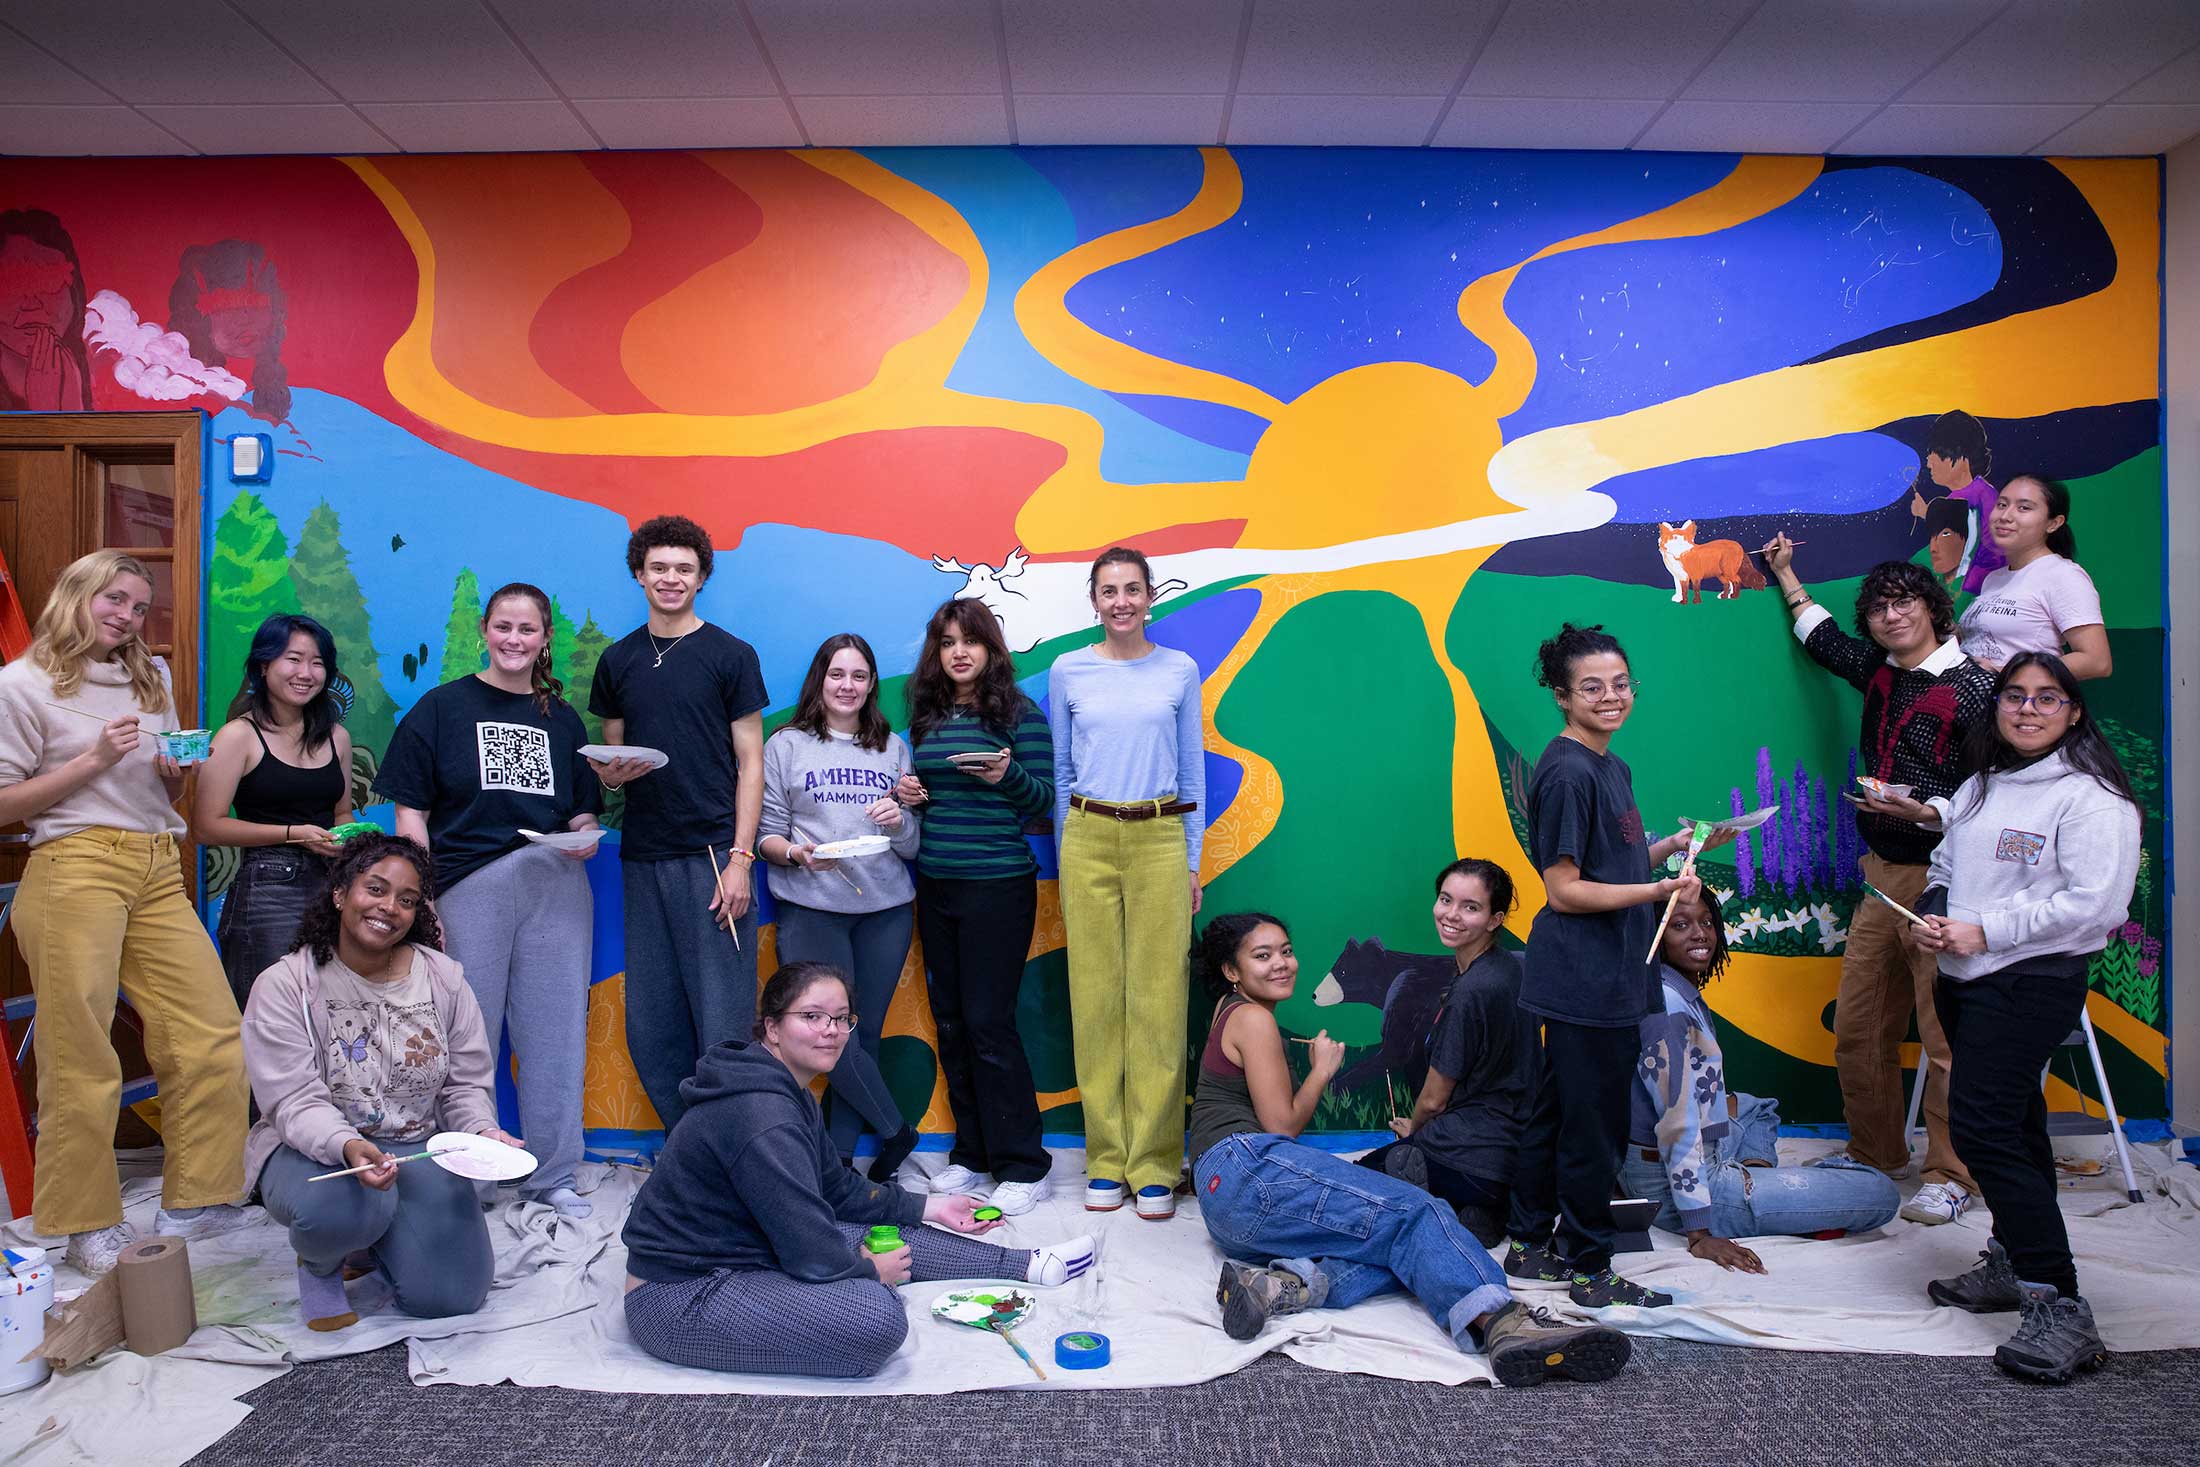 The art class members pose in front of the mural-in-progress.